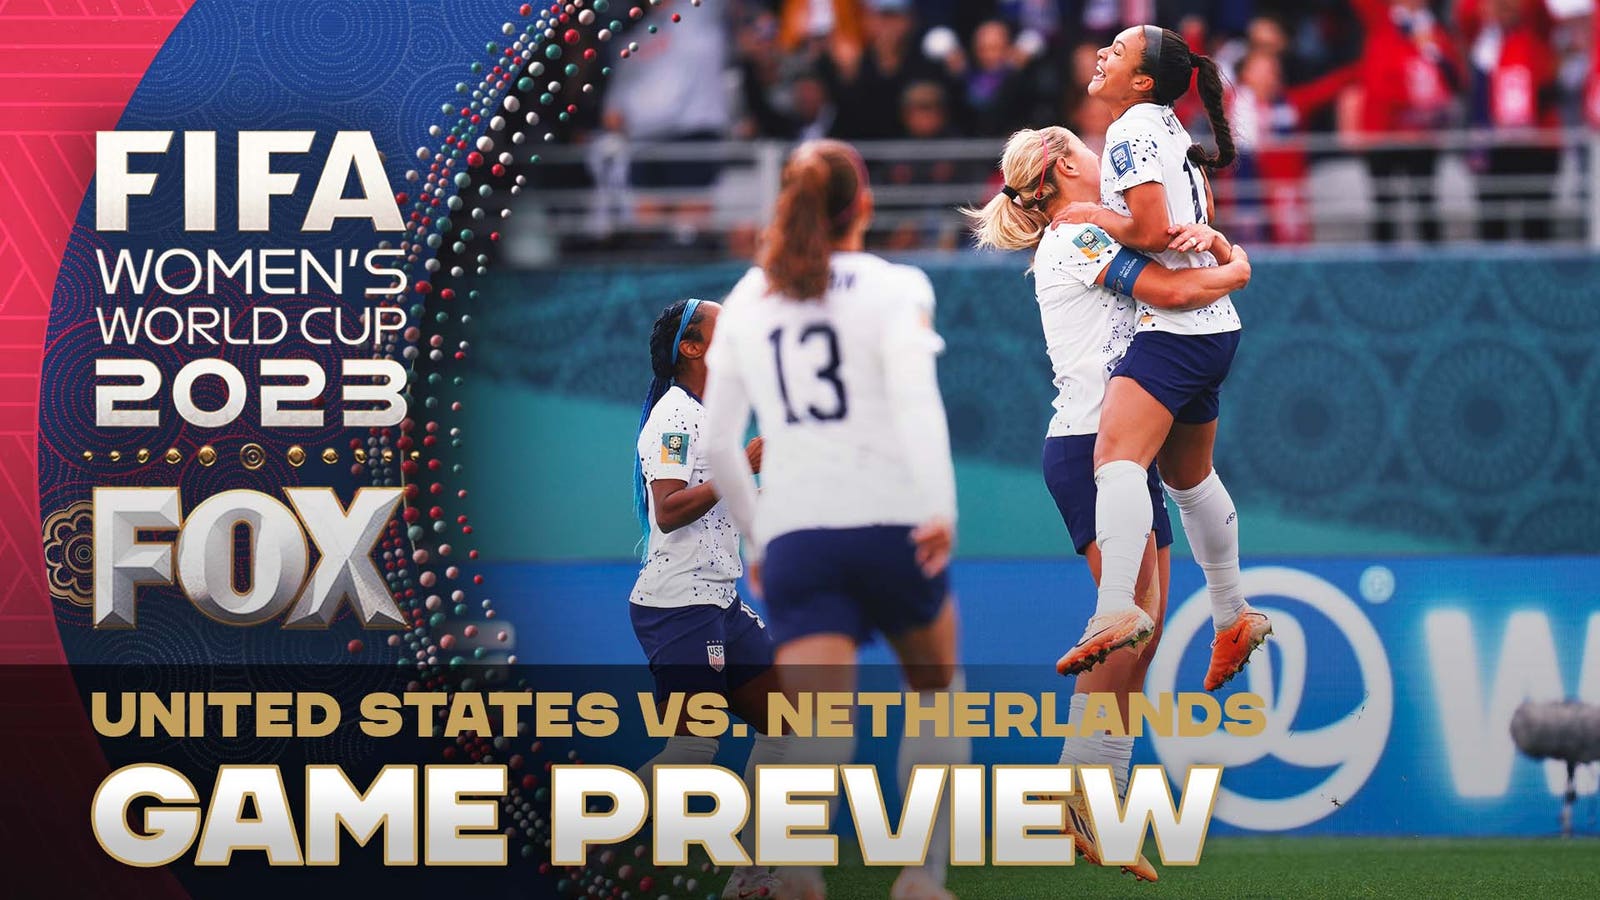 "First time that the US team will be tested defensively" — Ari Hingst on the USWNT's upcoming match up vs. Netherlands